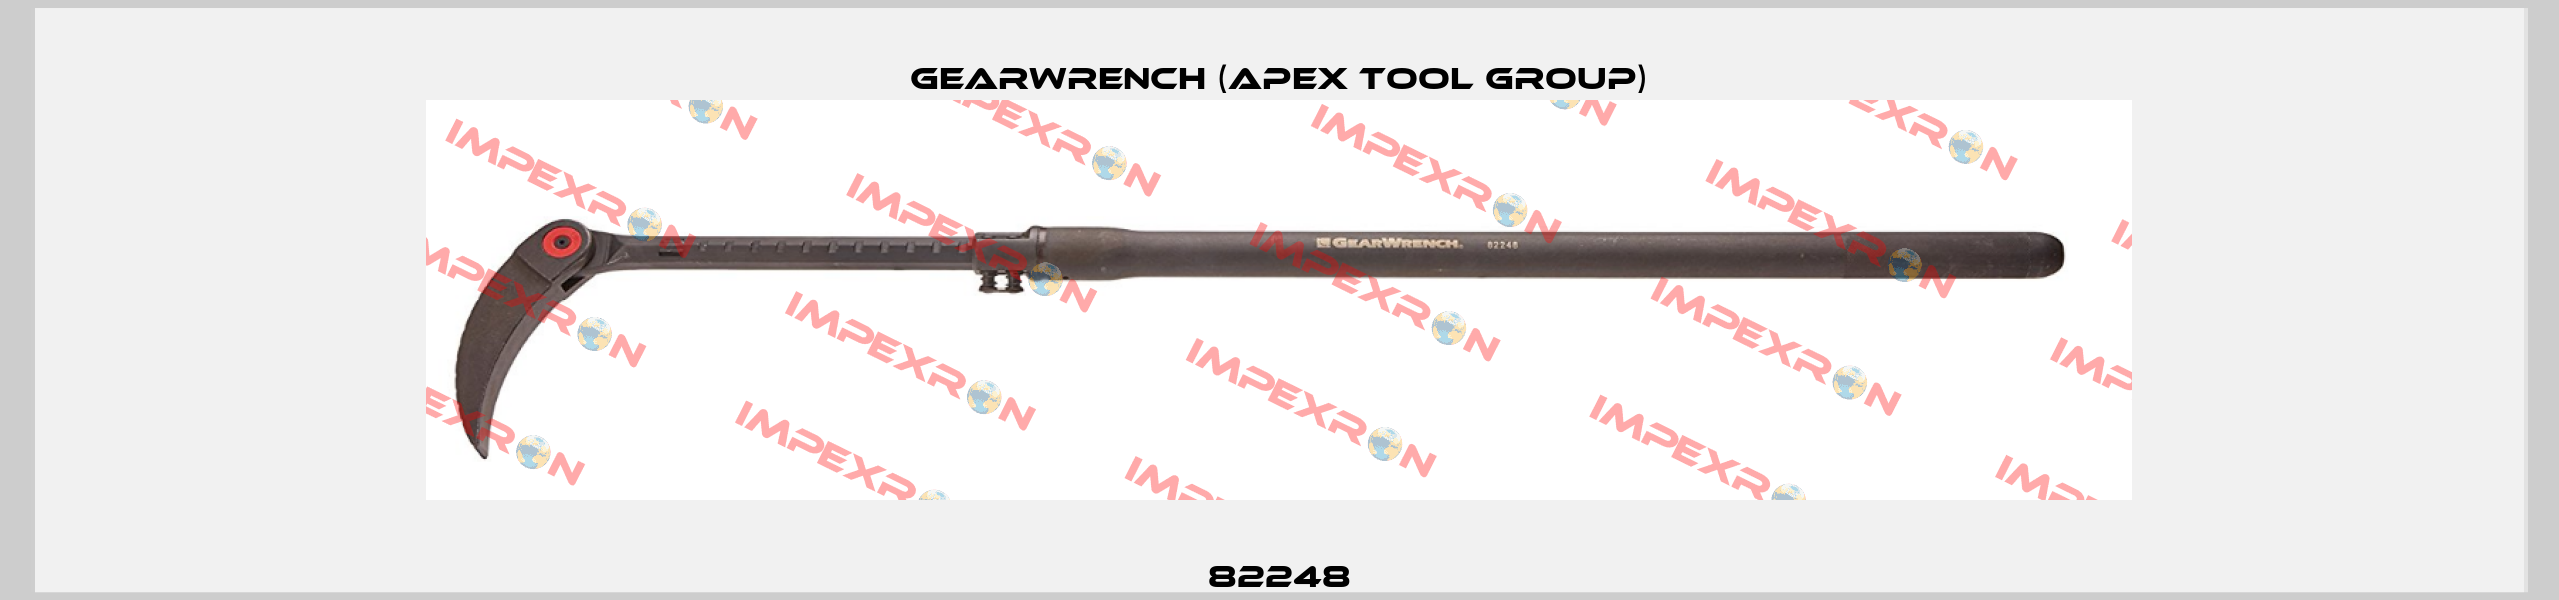 82248 GEARWRENCH (Apex Tool Group)